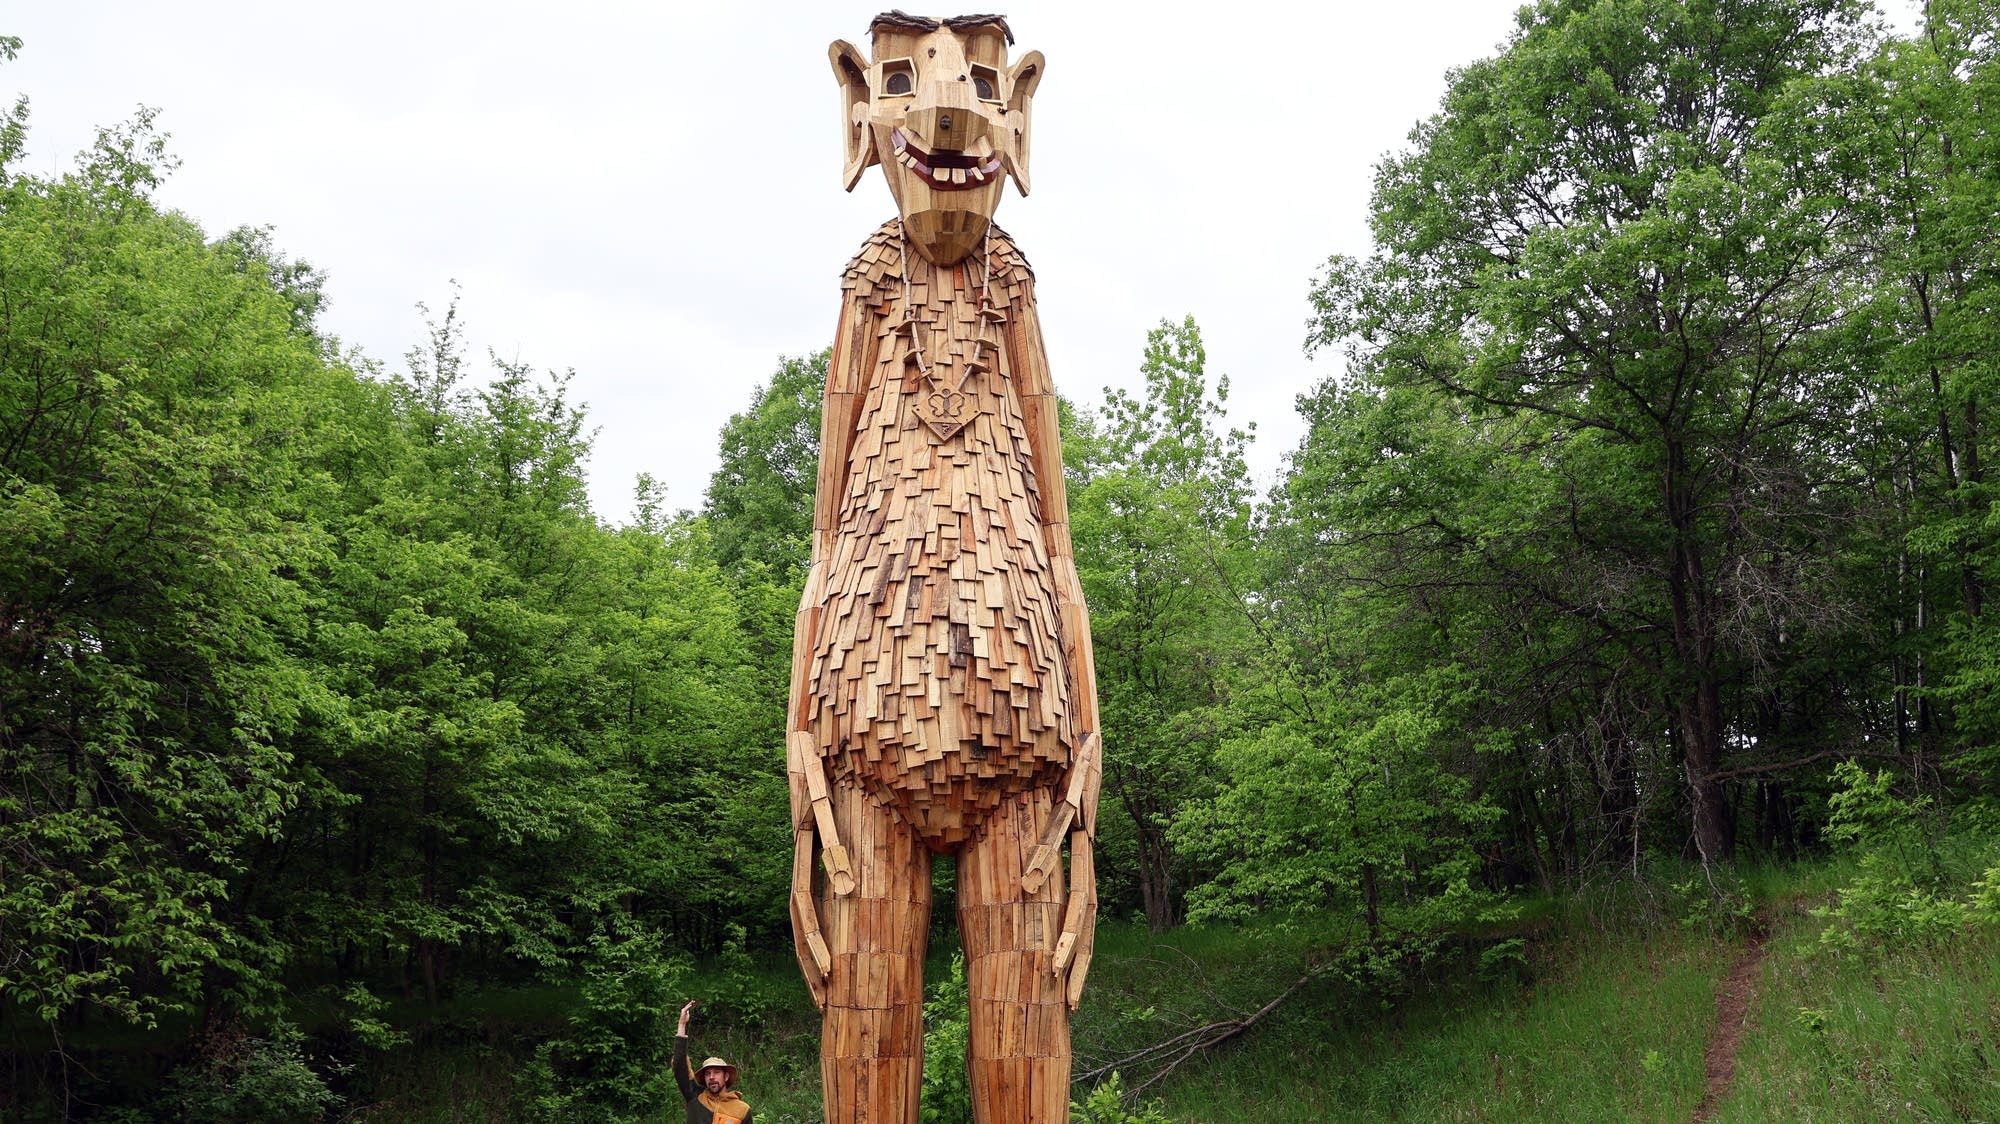 A giant troll installation and treasure hunt opens in northern Minnesota